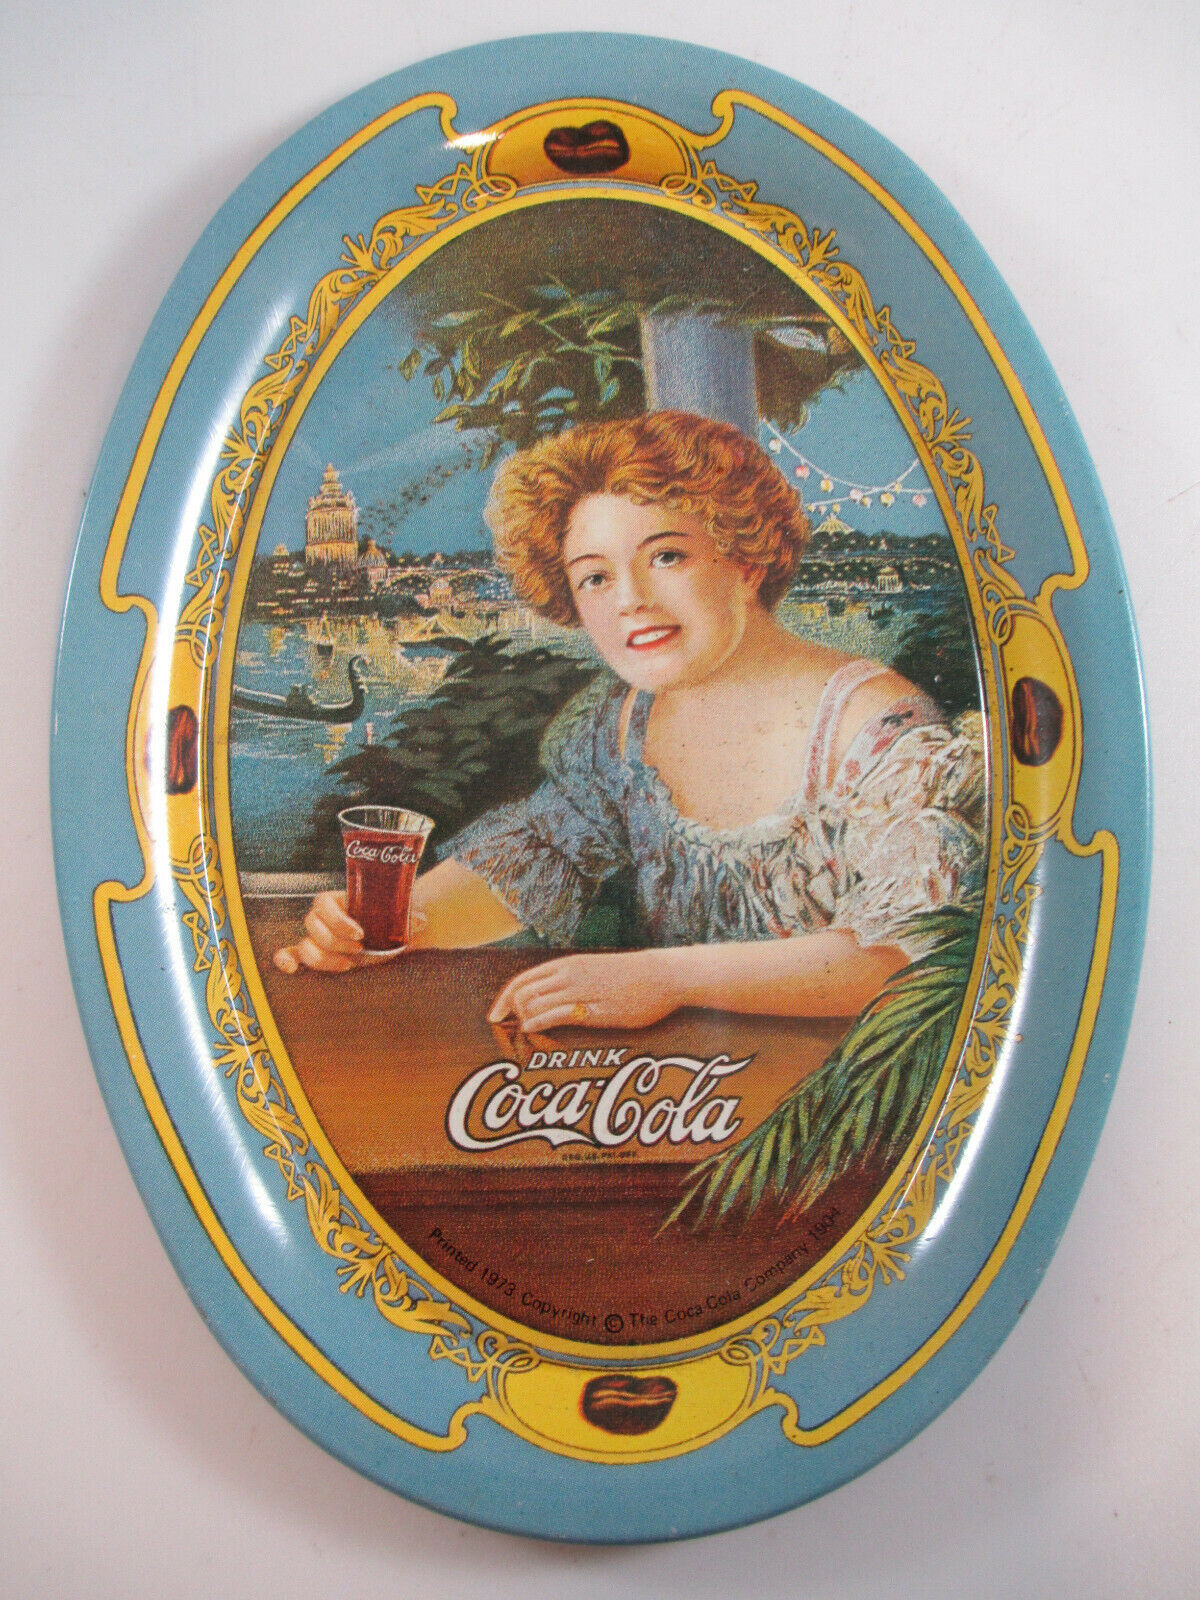 Primary image for Coca-Cola Vintage 1973 Reproduction Change Tray 1904 Heidi World's Fair Ad